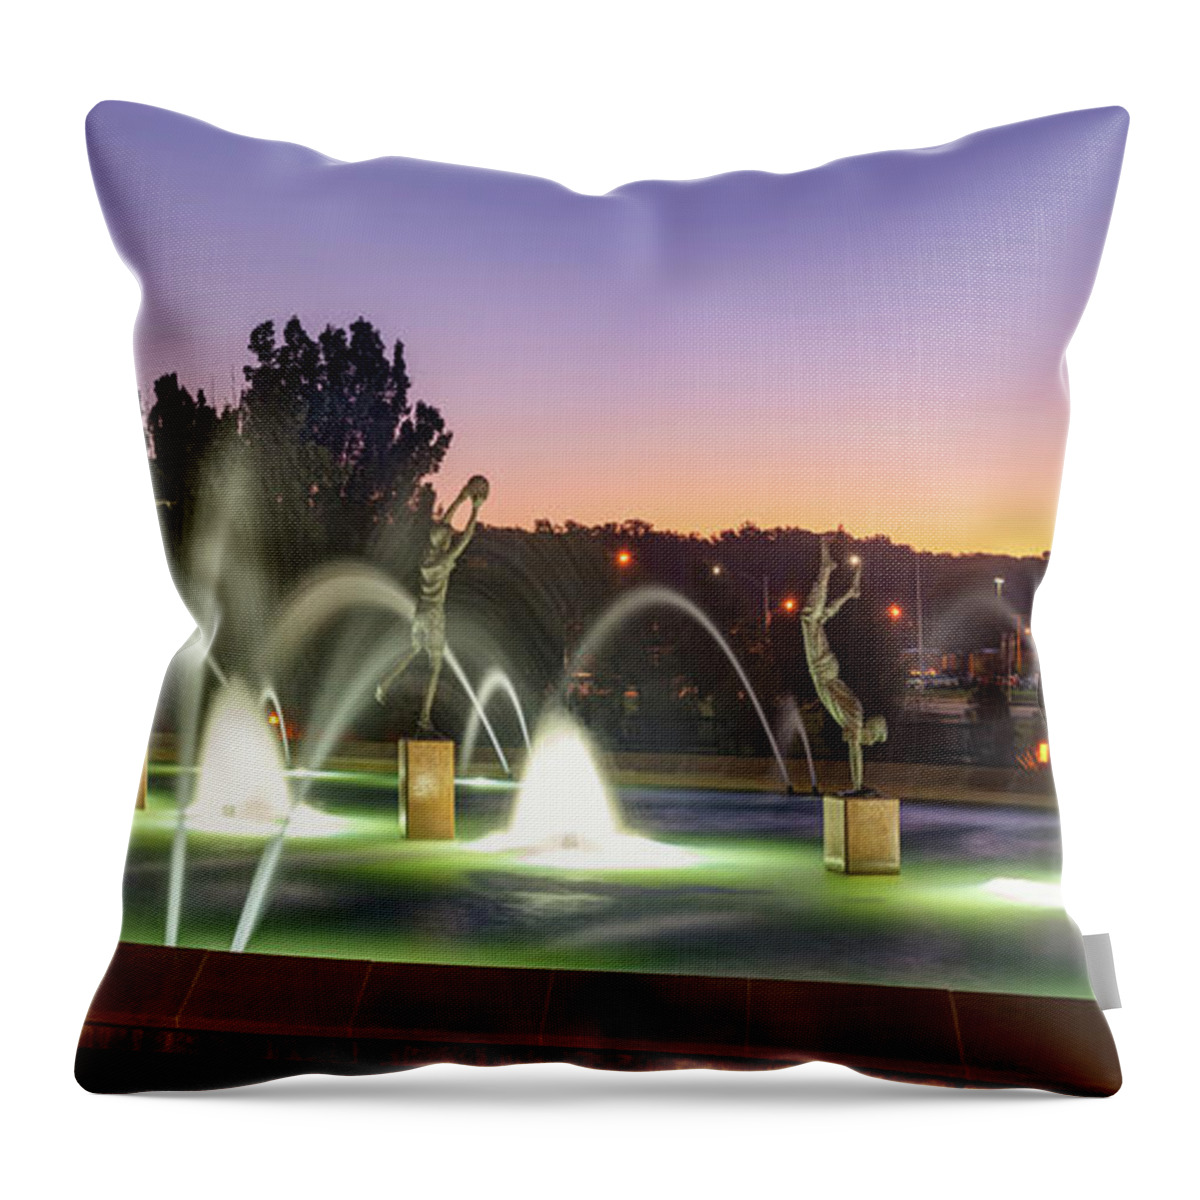 Kansas City Throw Pillow featuring the photograph Panoramic Sunrise at the Kansas City Children's Fountain by Gregory Ballos